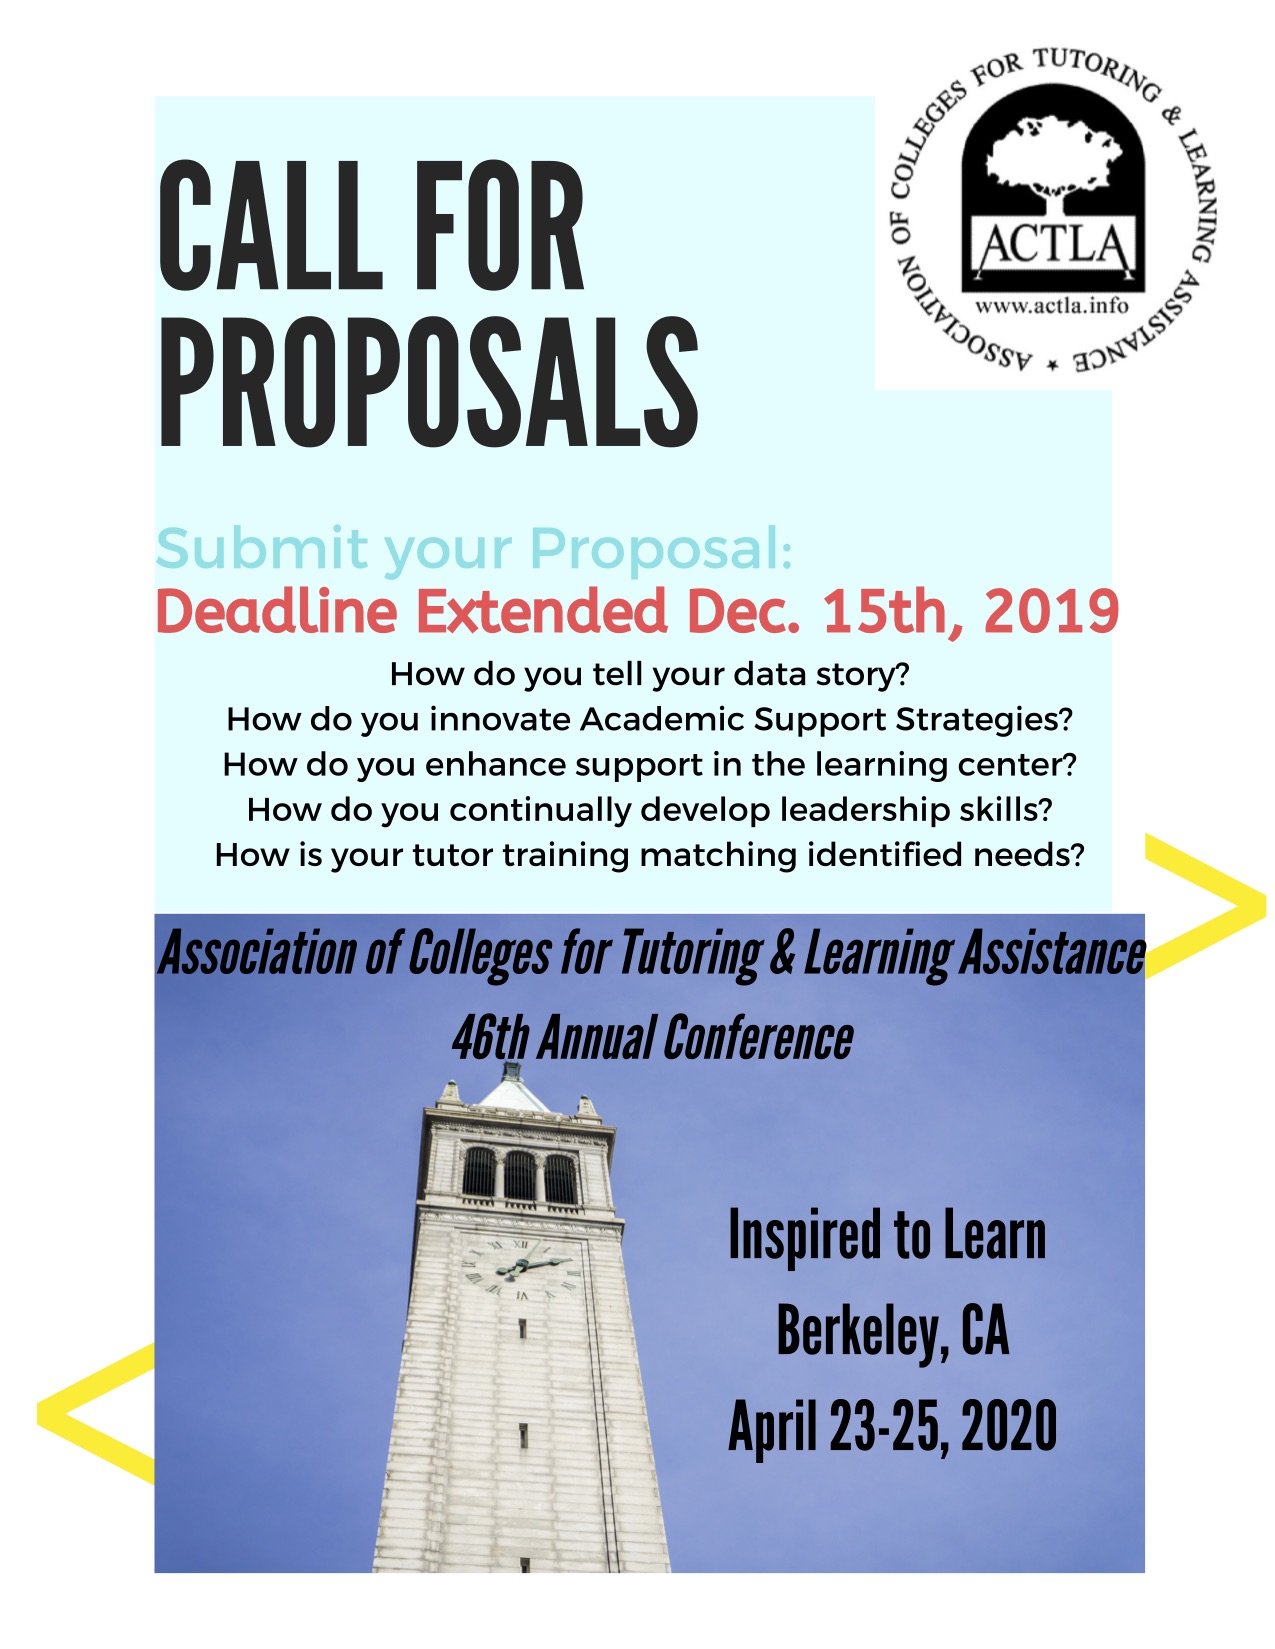 UPDATED Call for Proposals copy ACTLA